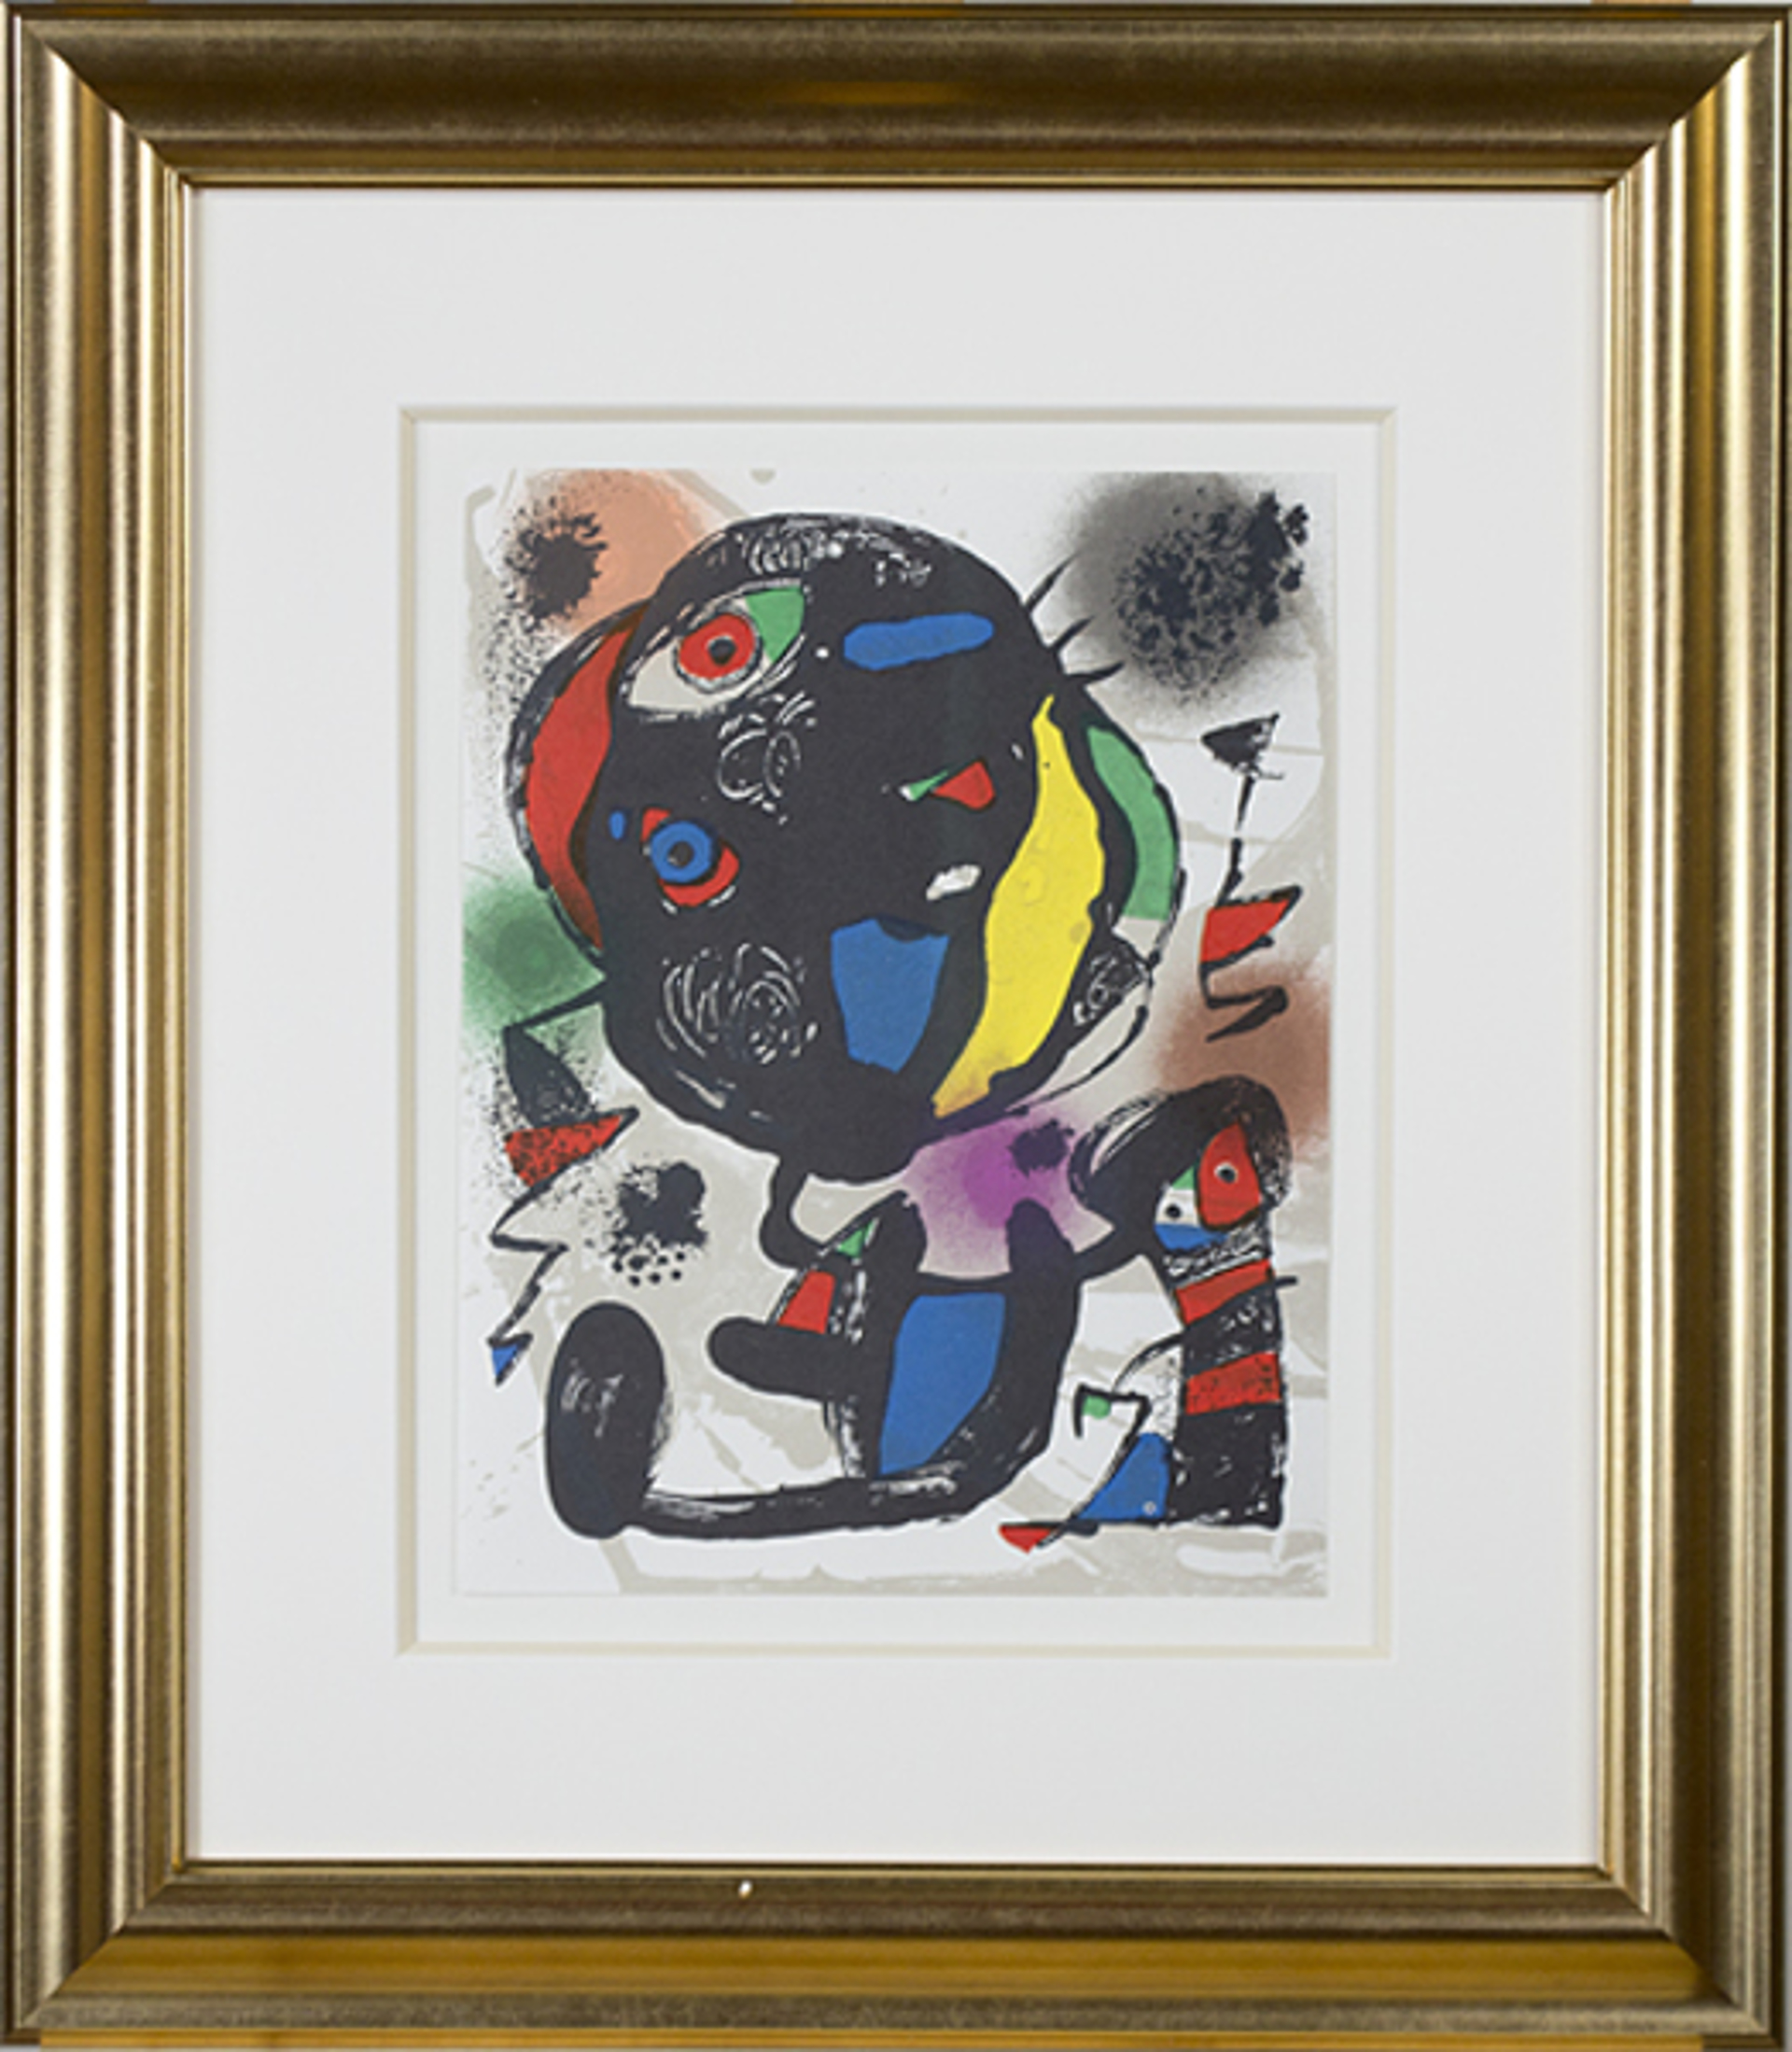 Lithographie Originale V from "Miro Lithographs IV, Maeght Publisher" by Joan Miró